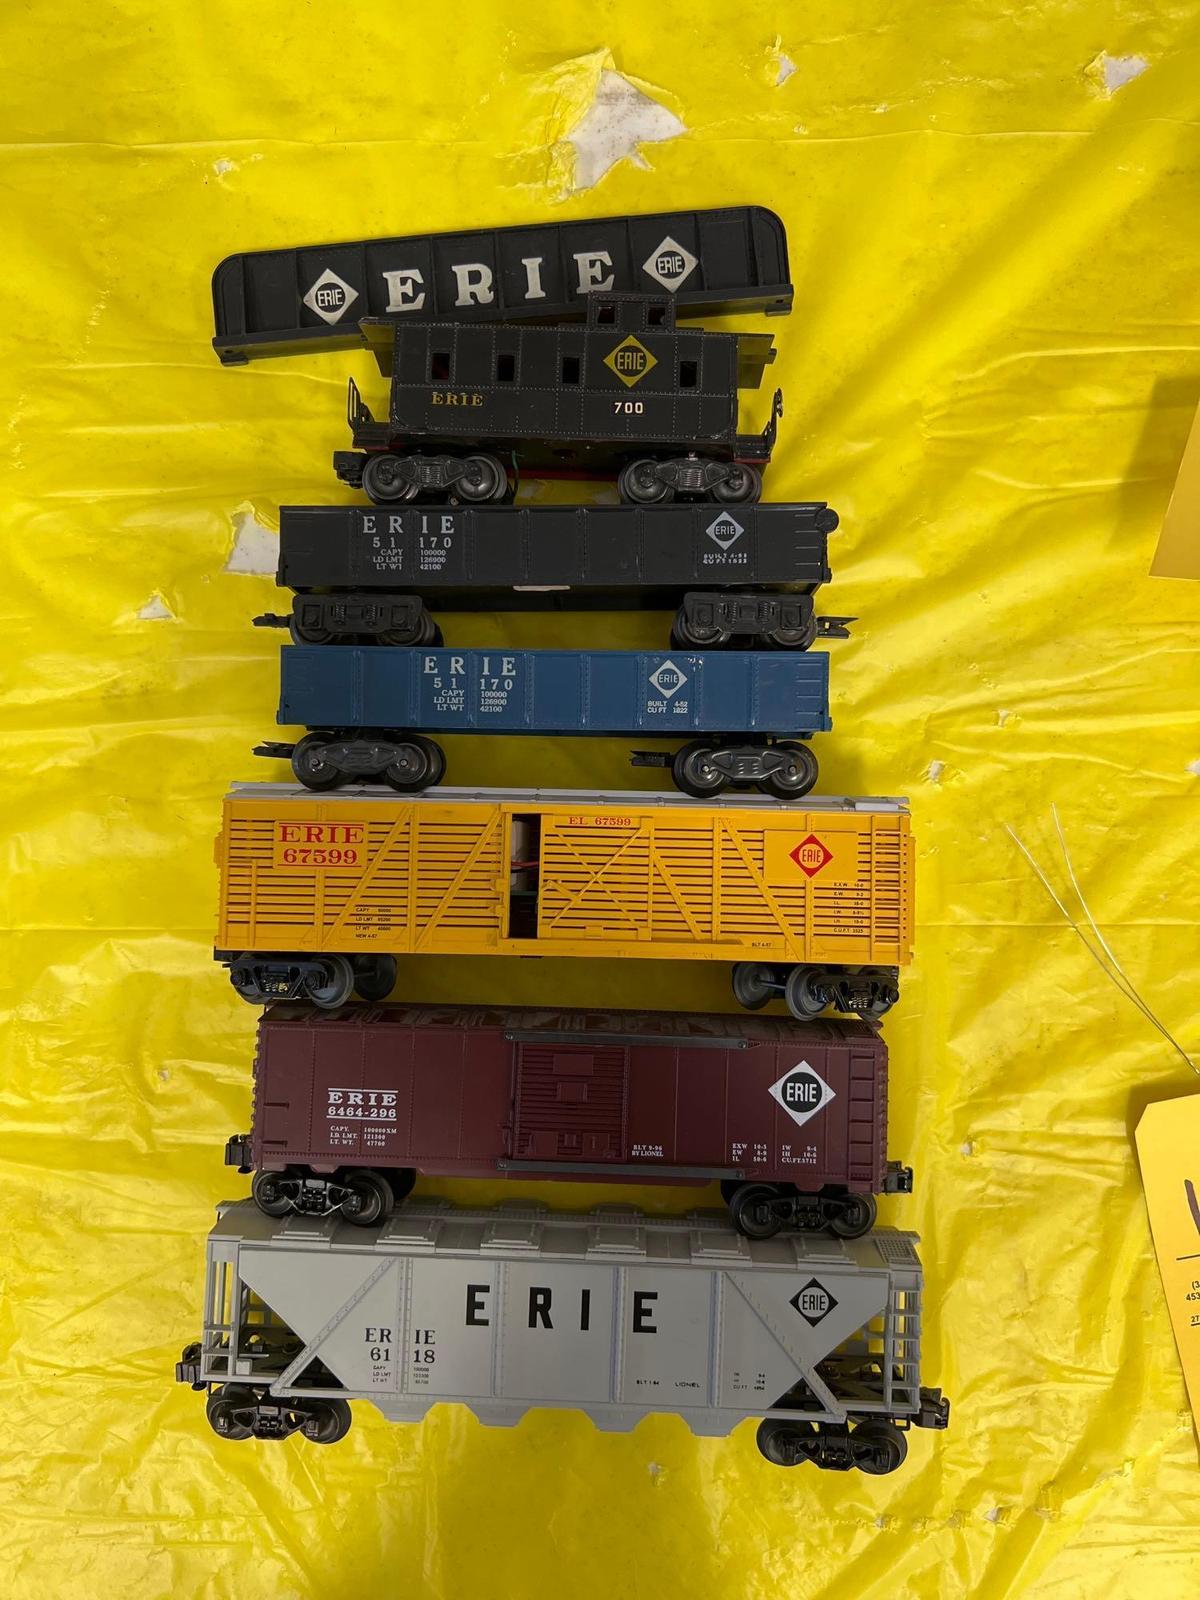 Assorted Brands Of Train Cars With Erie Name